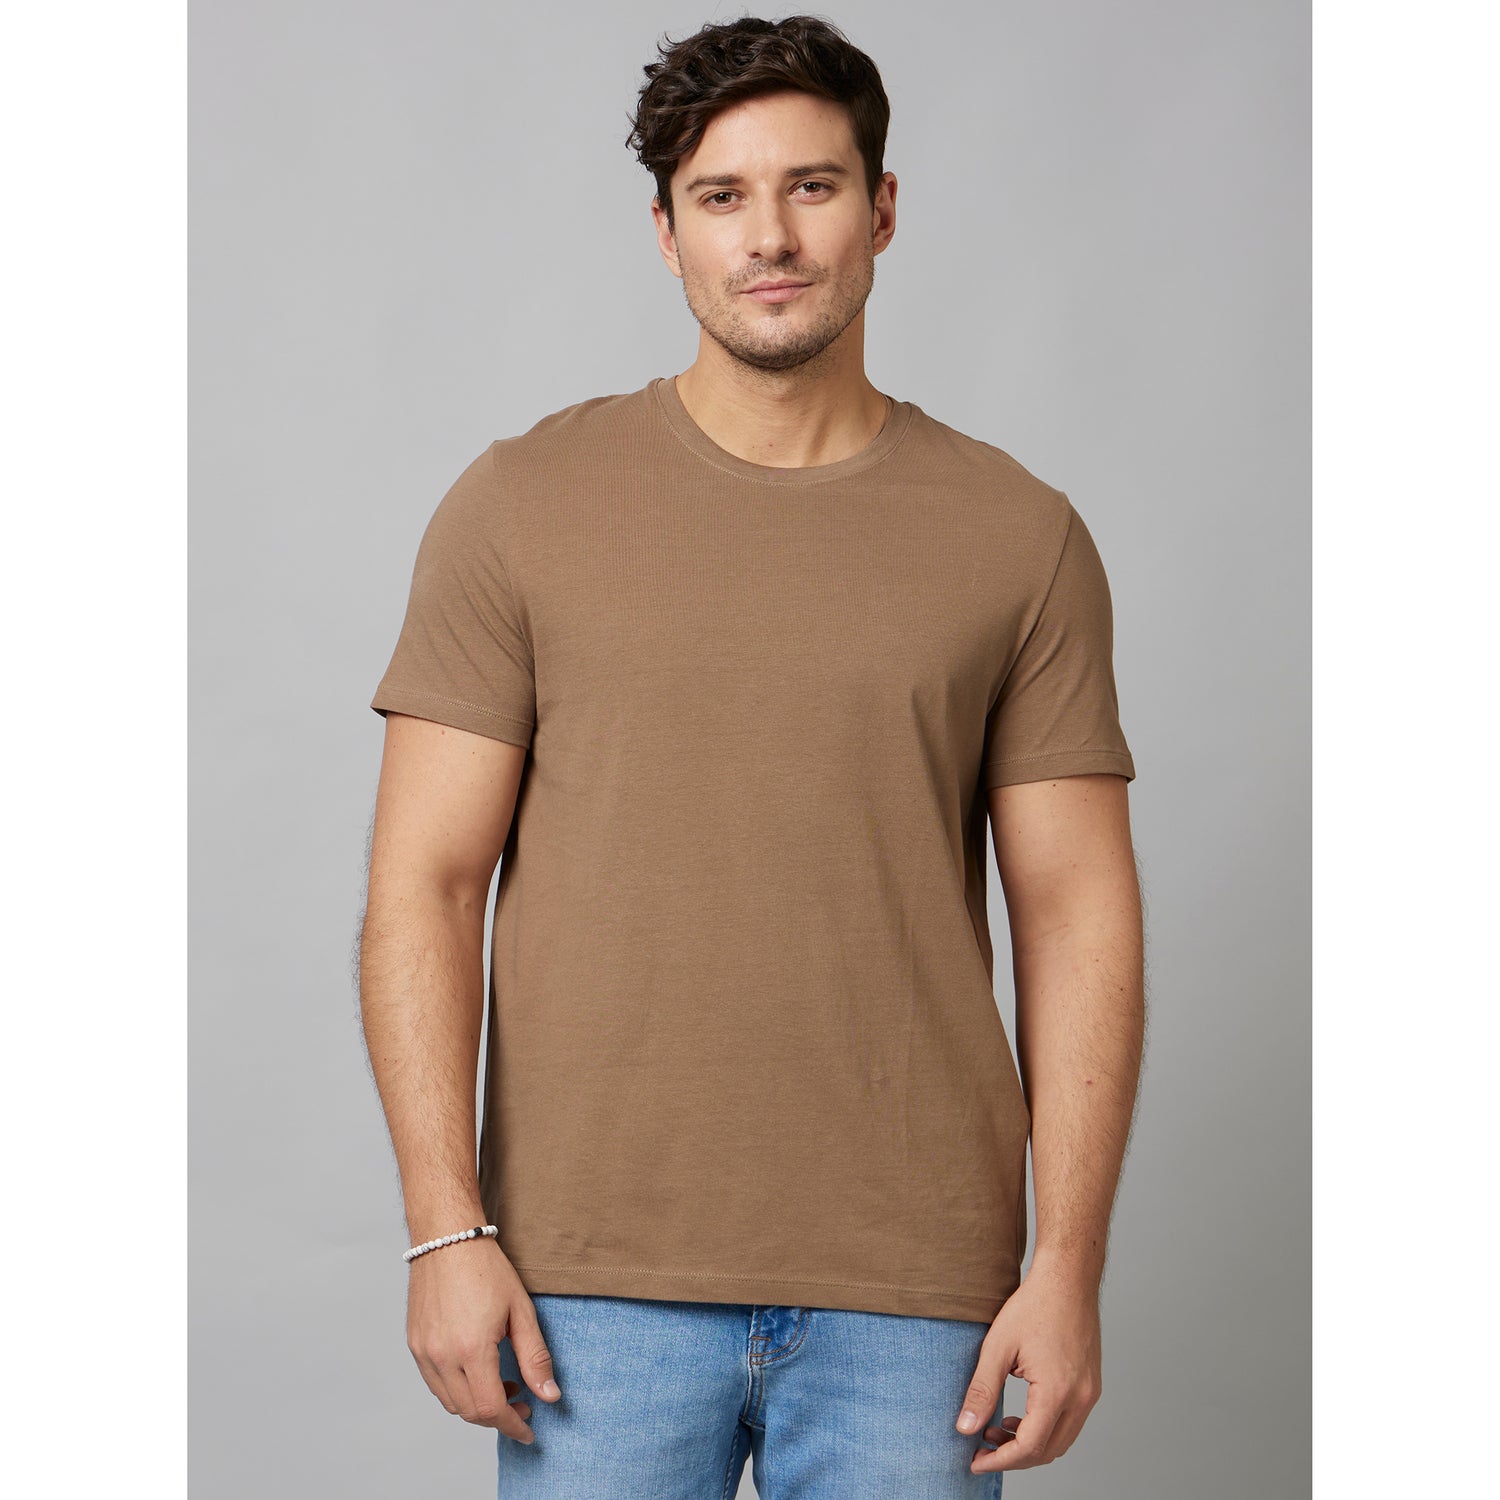 Brown Solid Short Sleeve Cotton T-Shirts (TEBASE1)